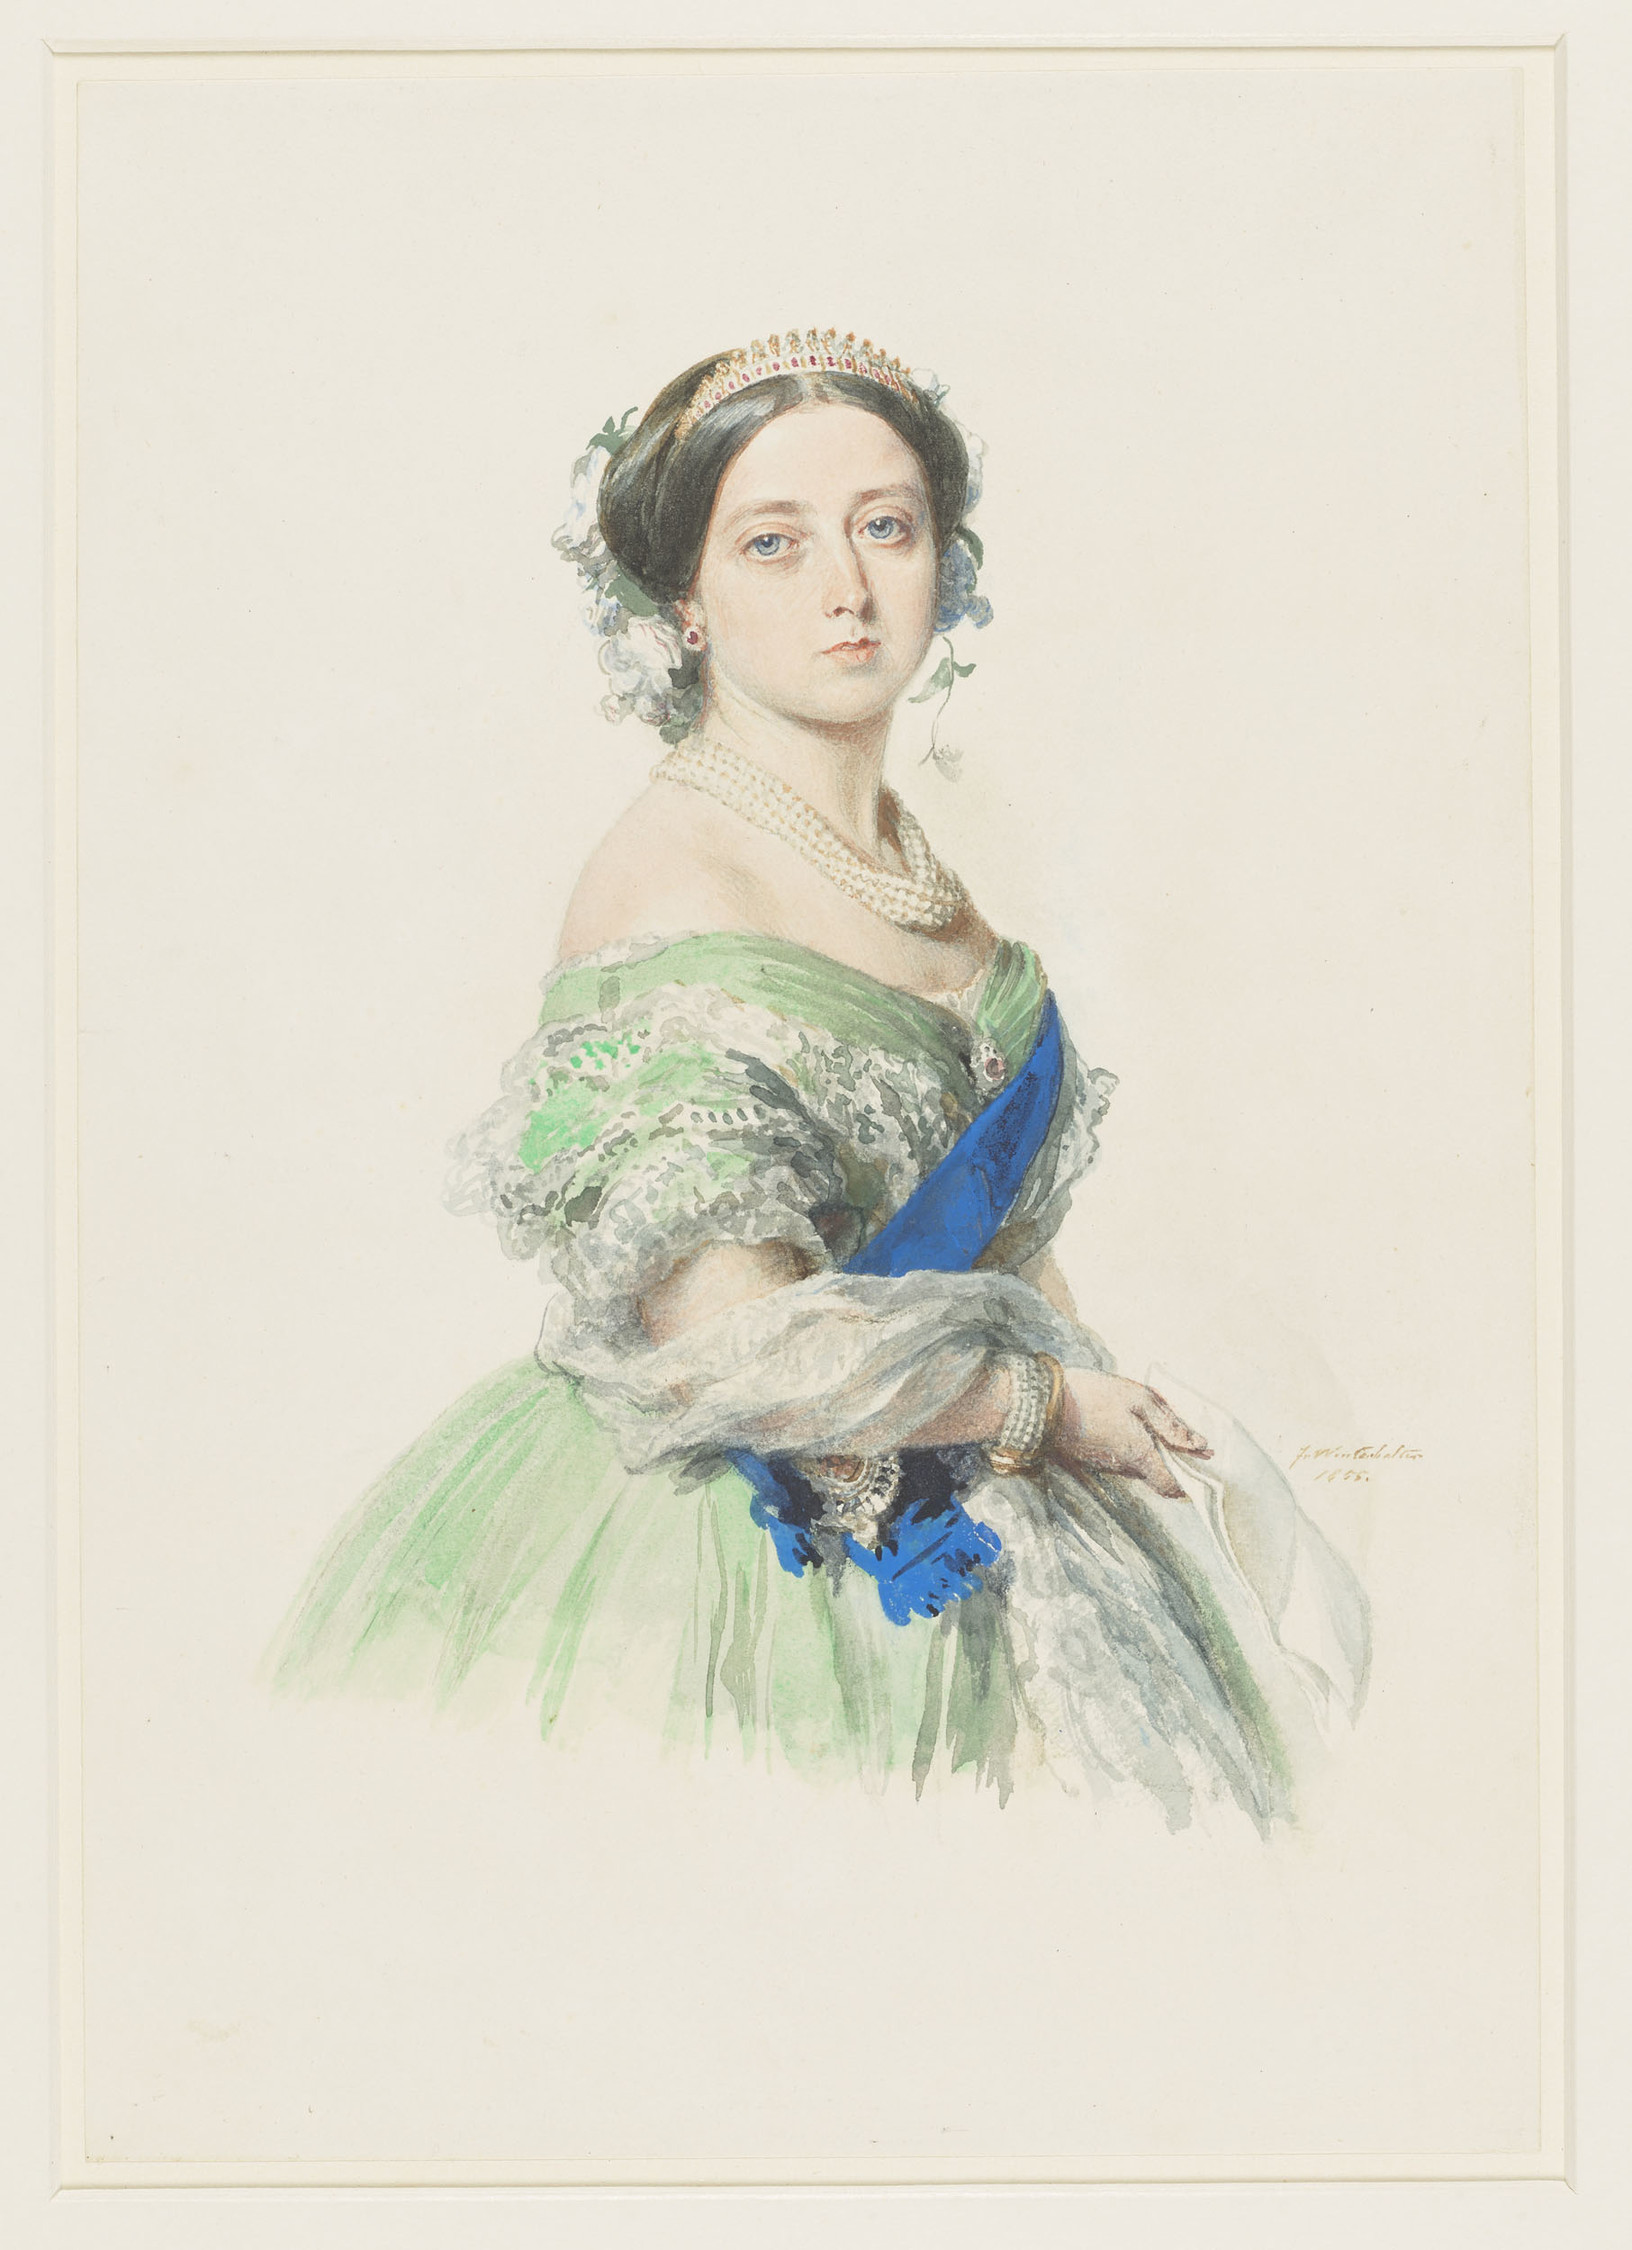 A three-quarter length watercolour portrait of Queen Victoria, facing front, wearing a green dress with the ribbon and star of the Garter, and holding a paper. Signed and dated at bottom right. 
In June 1855 Queen Victoria recorded in her journal giving m